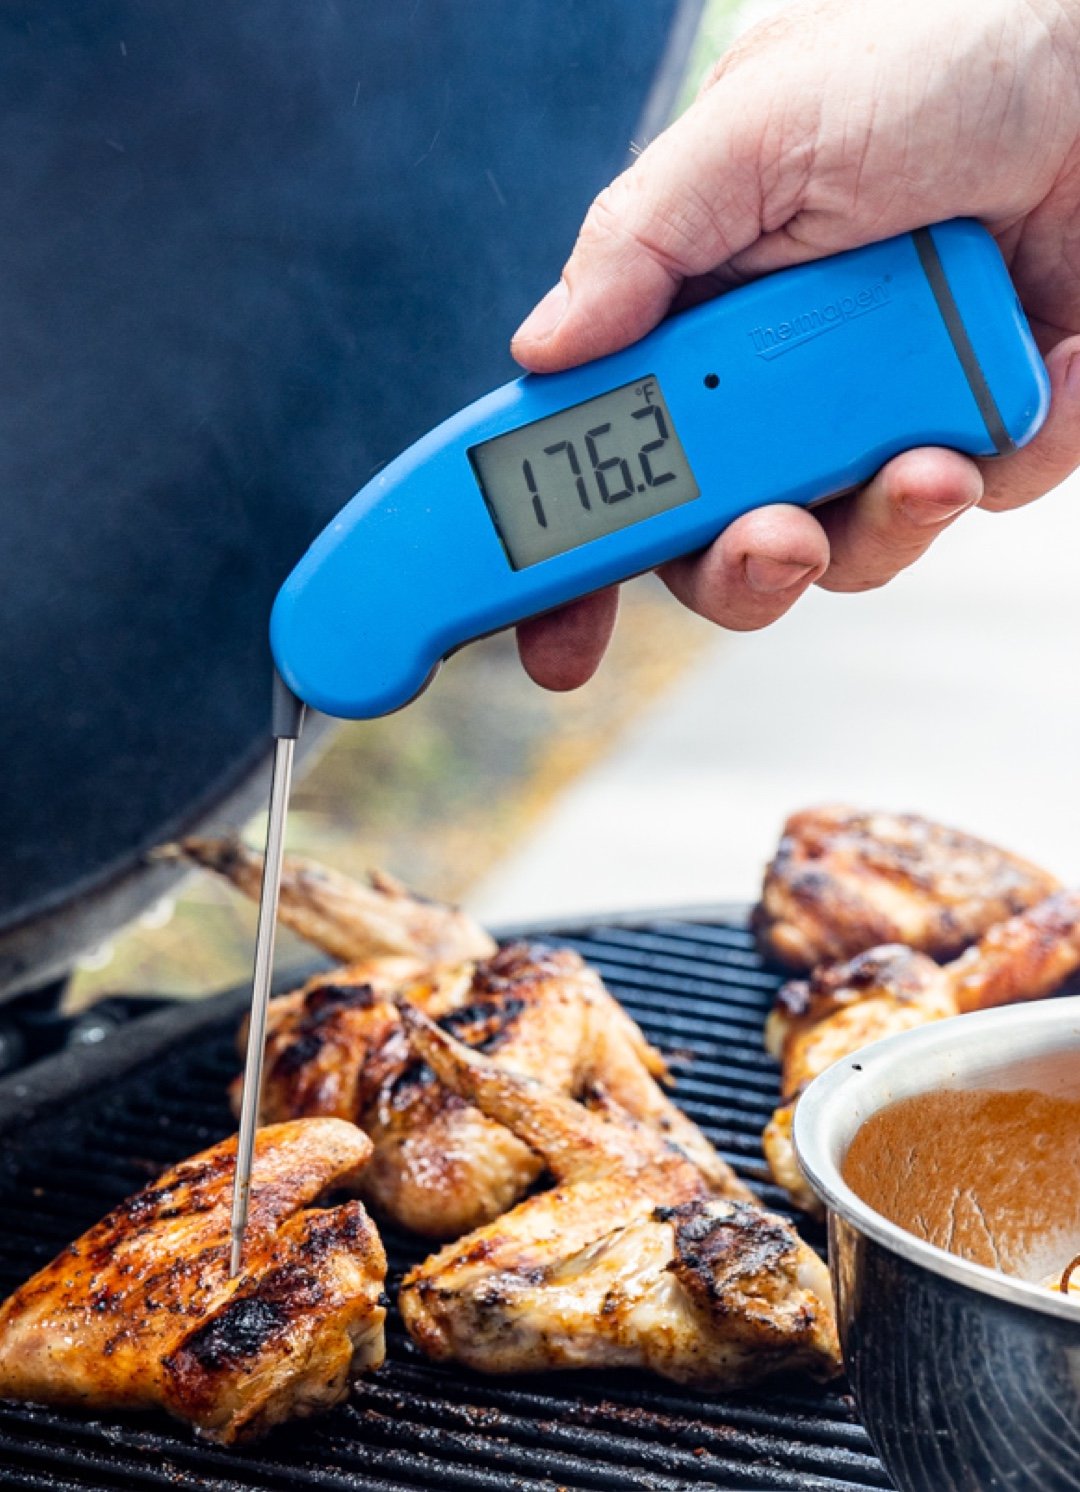 Thermoworks Dot Review: A Simple, Affordable Remote Thermometer